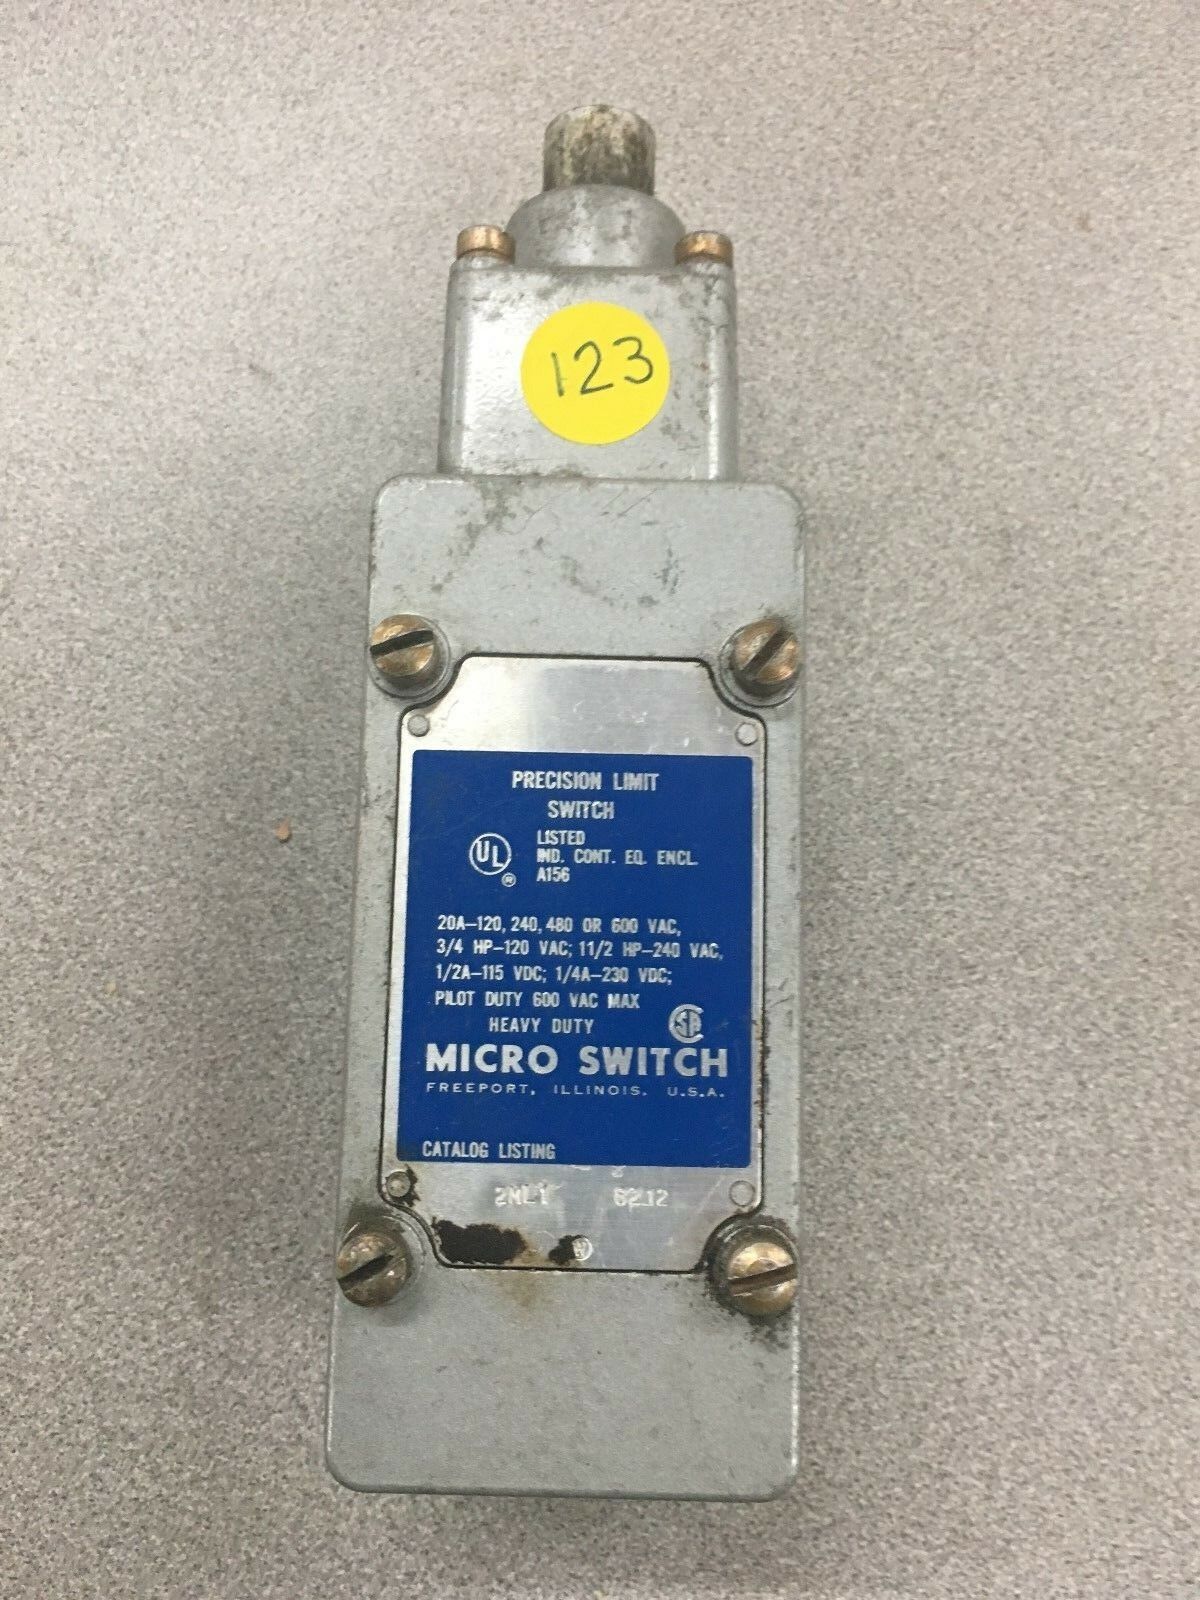 USED MICRO SWITCH PRECISION LIMIT SWITCH 2ML1 8212